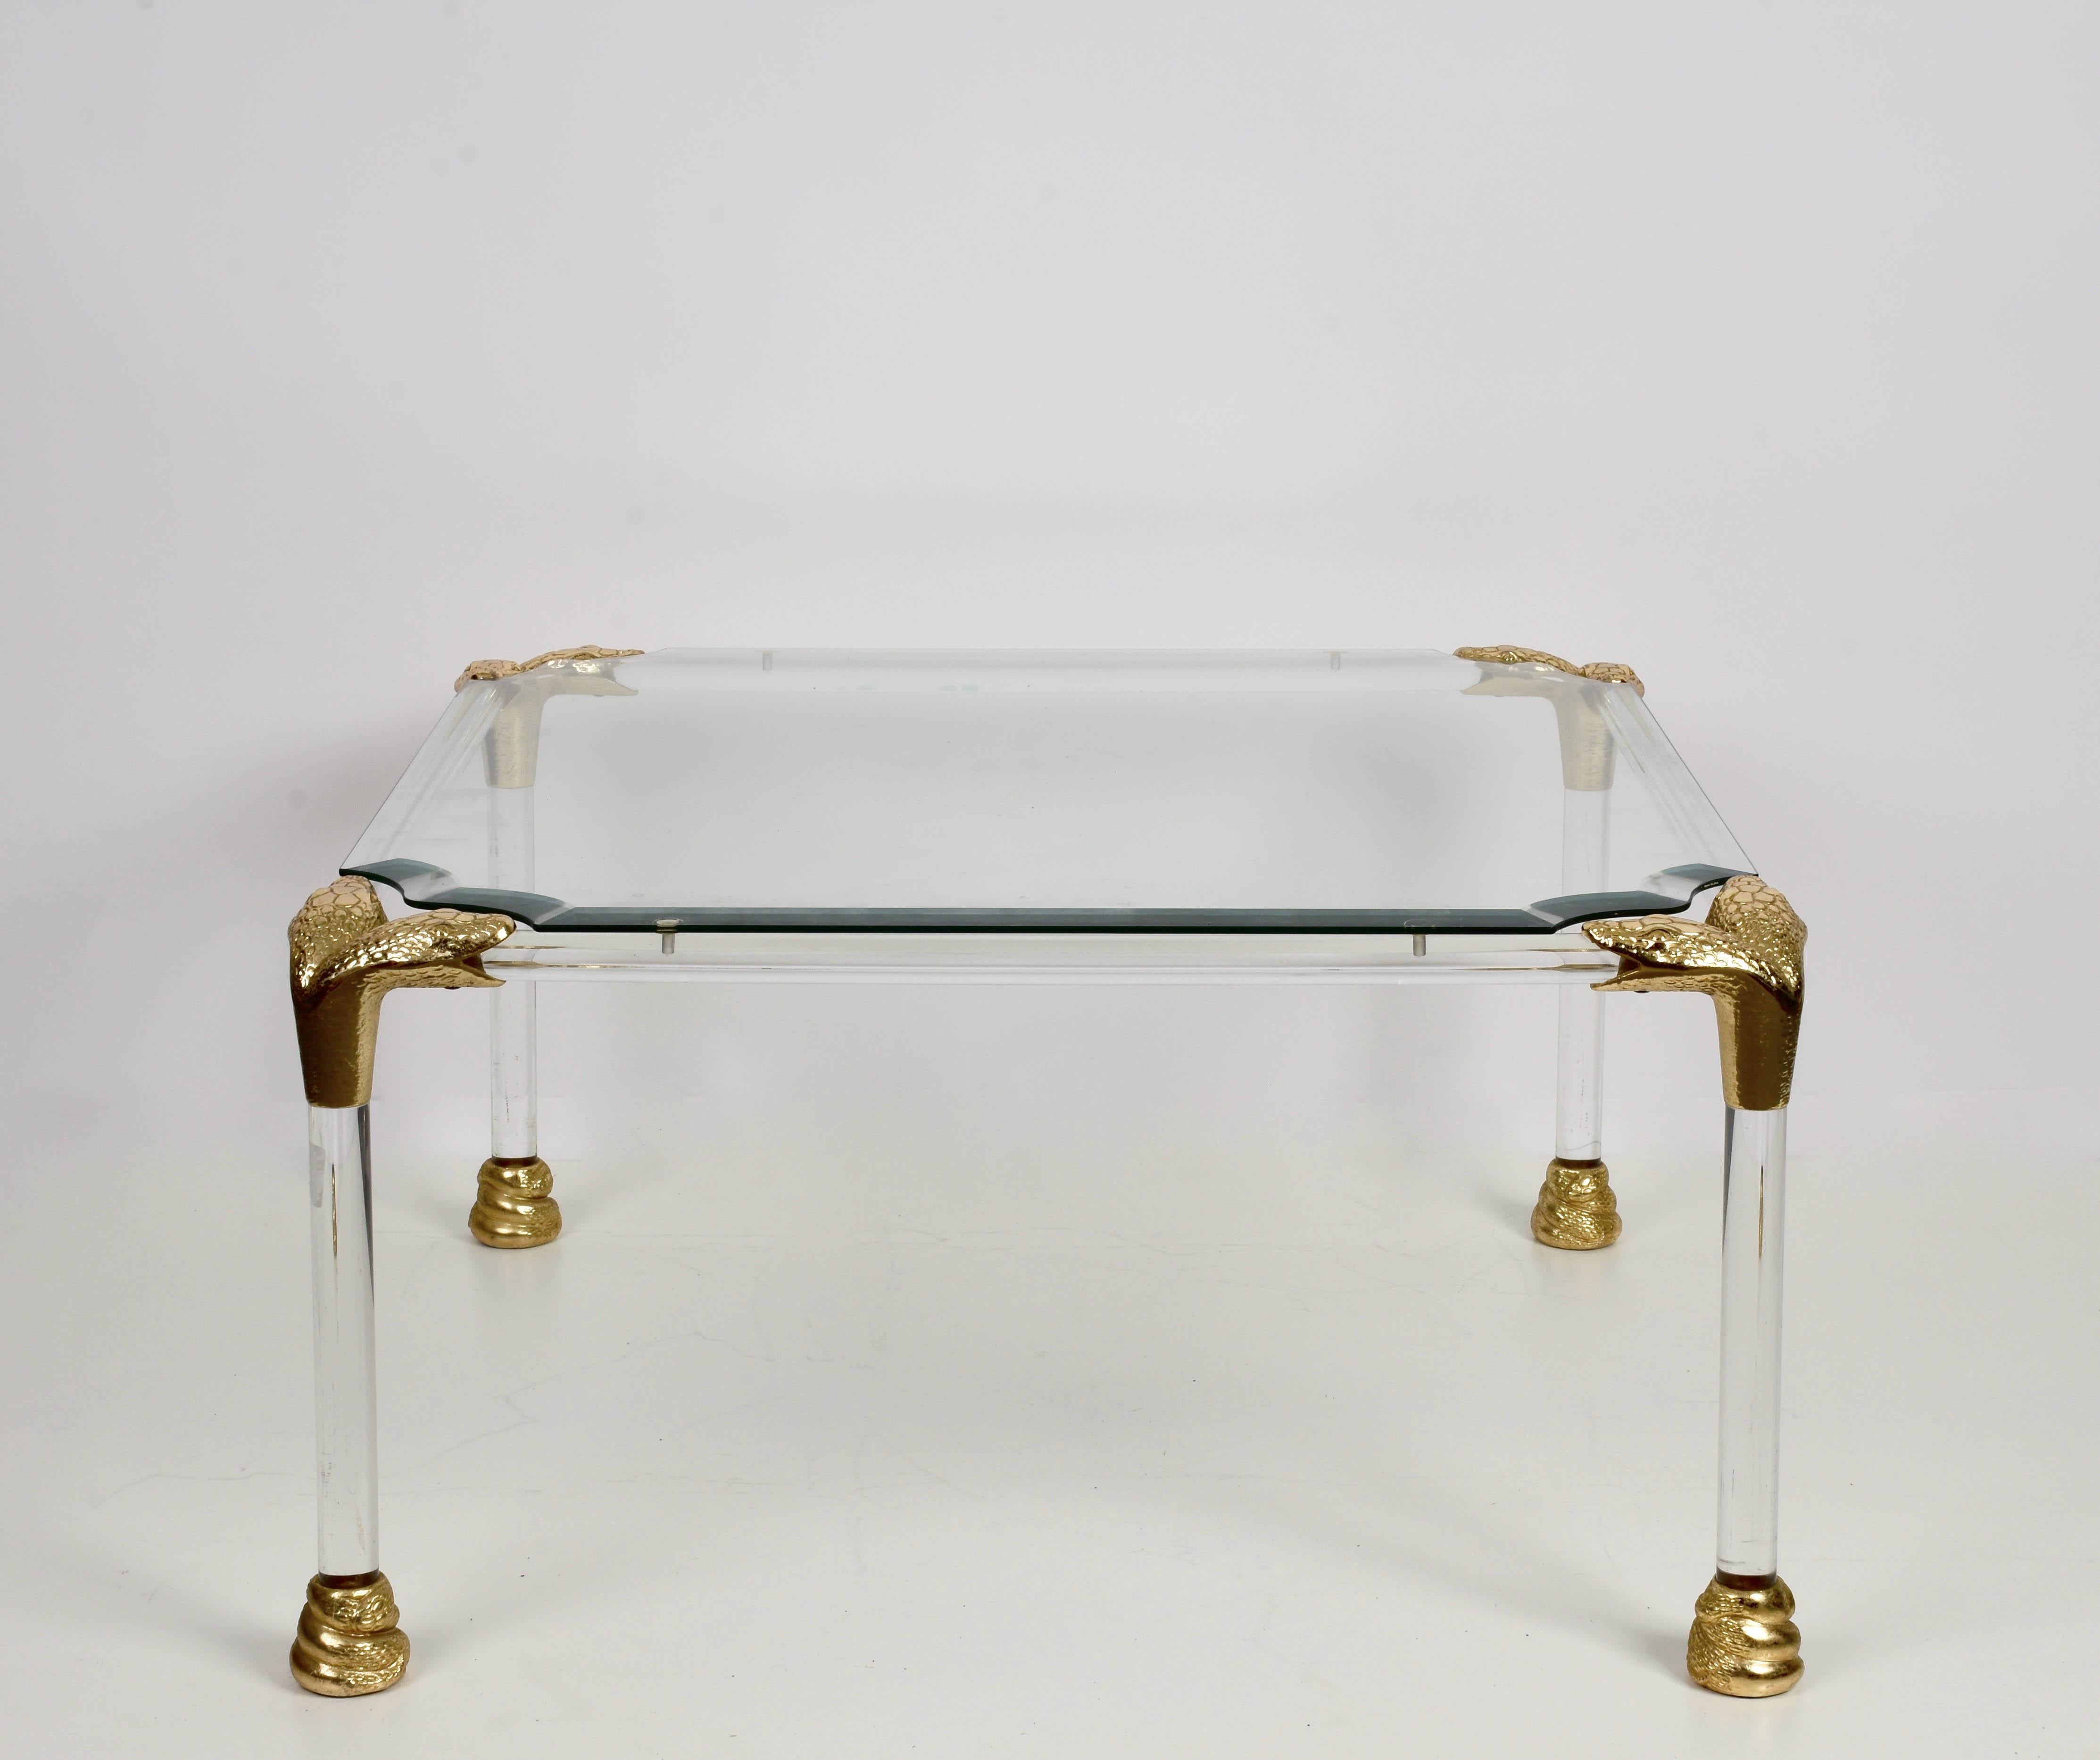 Midcentury Lucite and brass coffee table with snakehead details. This elegant item was designed during the 1970s in Italy.

This elegant cocktail table is marvelous as unique details like it has snakehead brass corners and brass snake bodies as